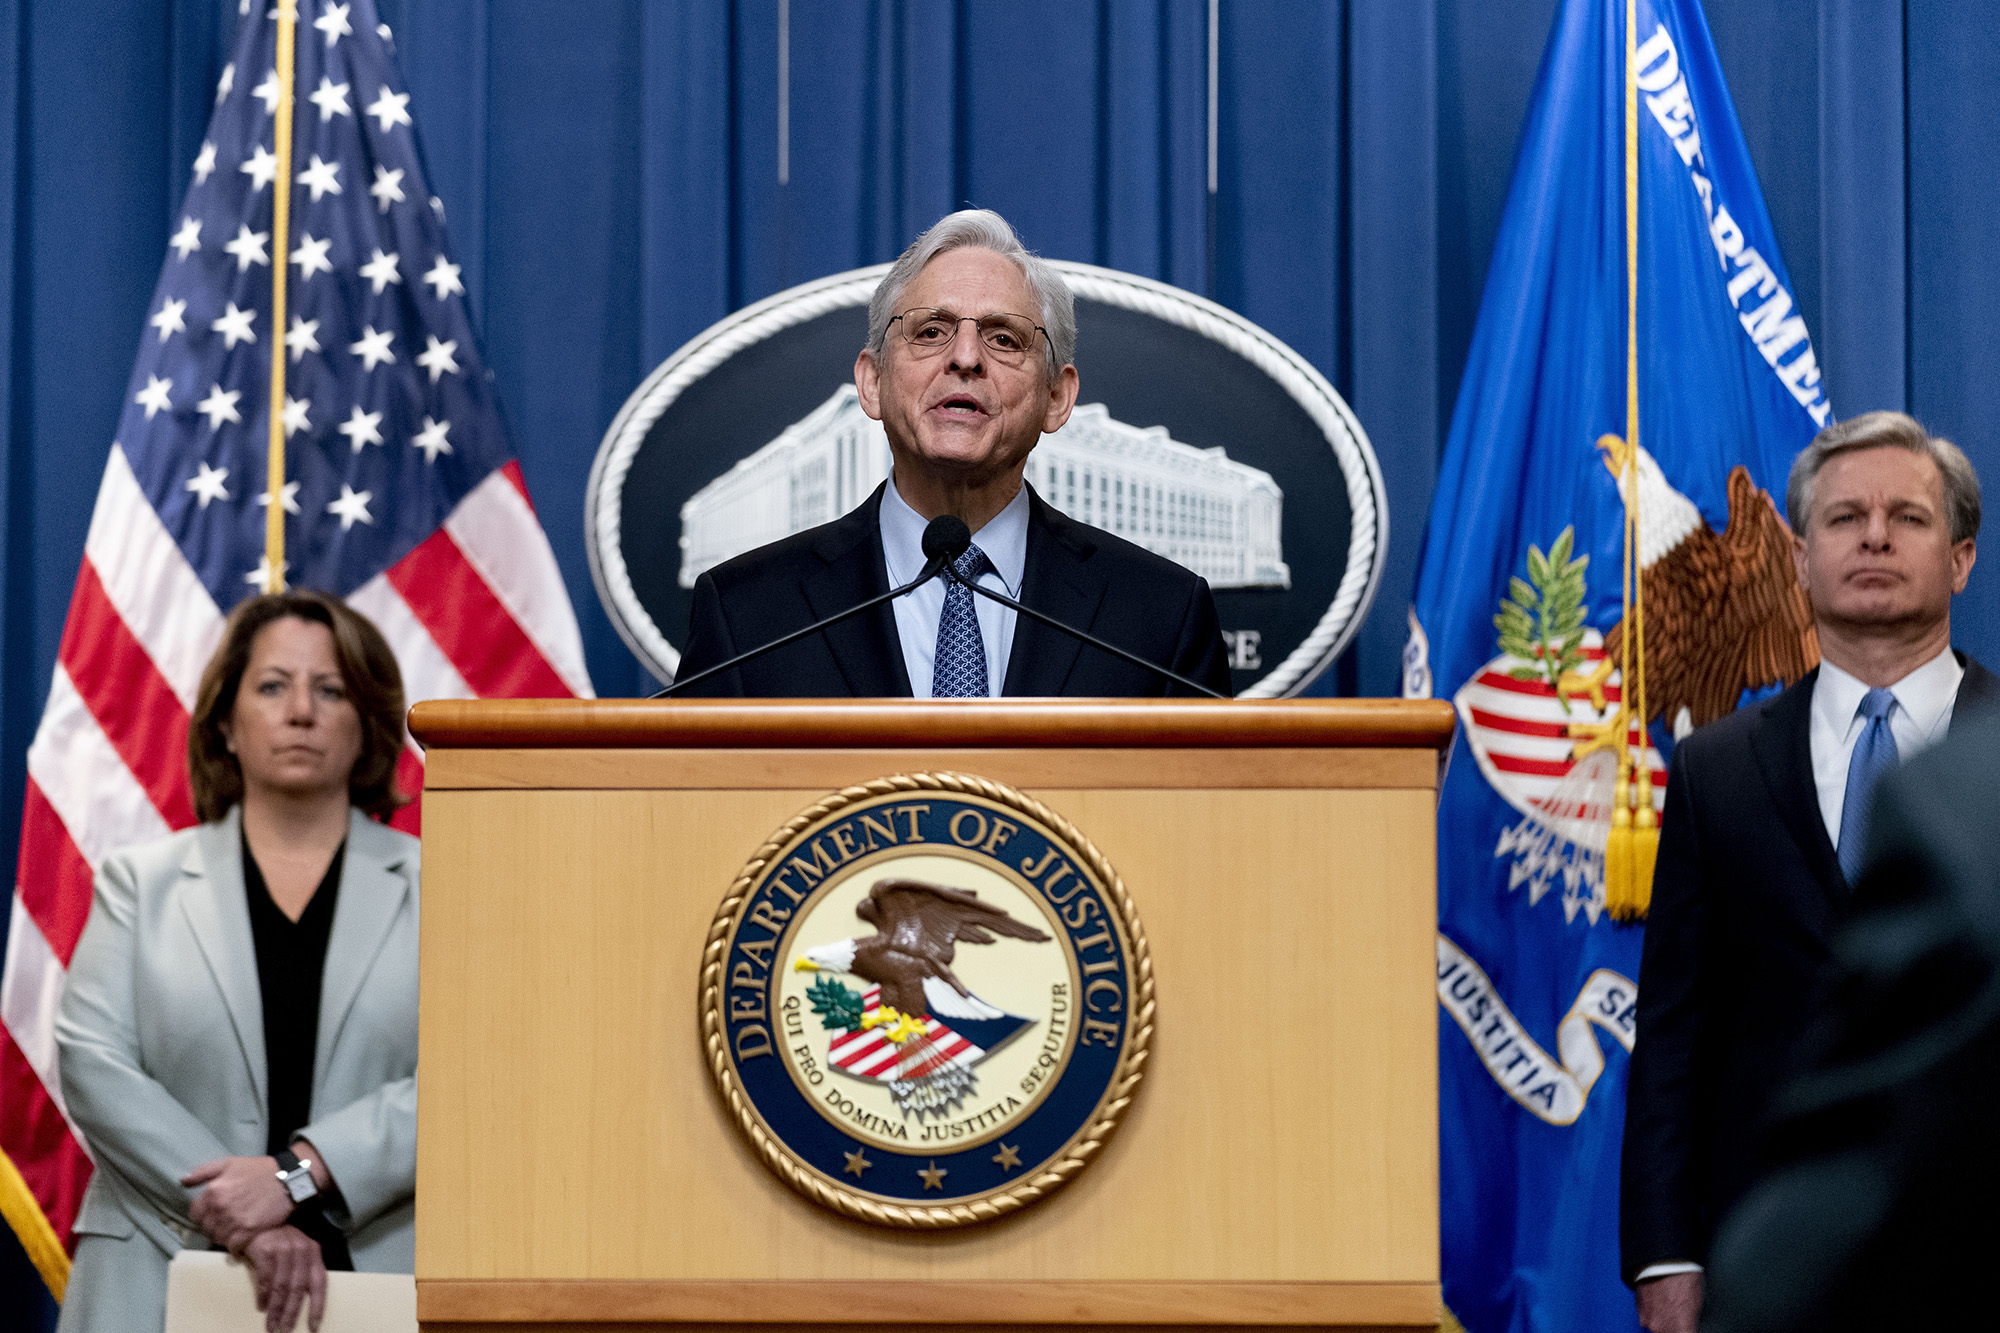 Attorney General Merrick Garland, center, accompanied by Deputy Attorney General Lisa Monaco, left, and FBI Director Christopher Wray, right, speaks at a news conference at the Justice Department in Washington D.C, on April 6.